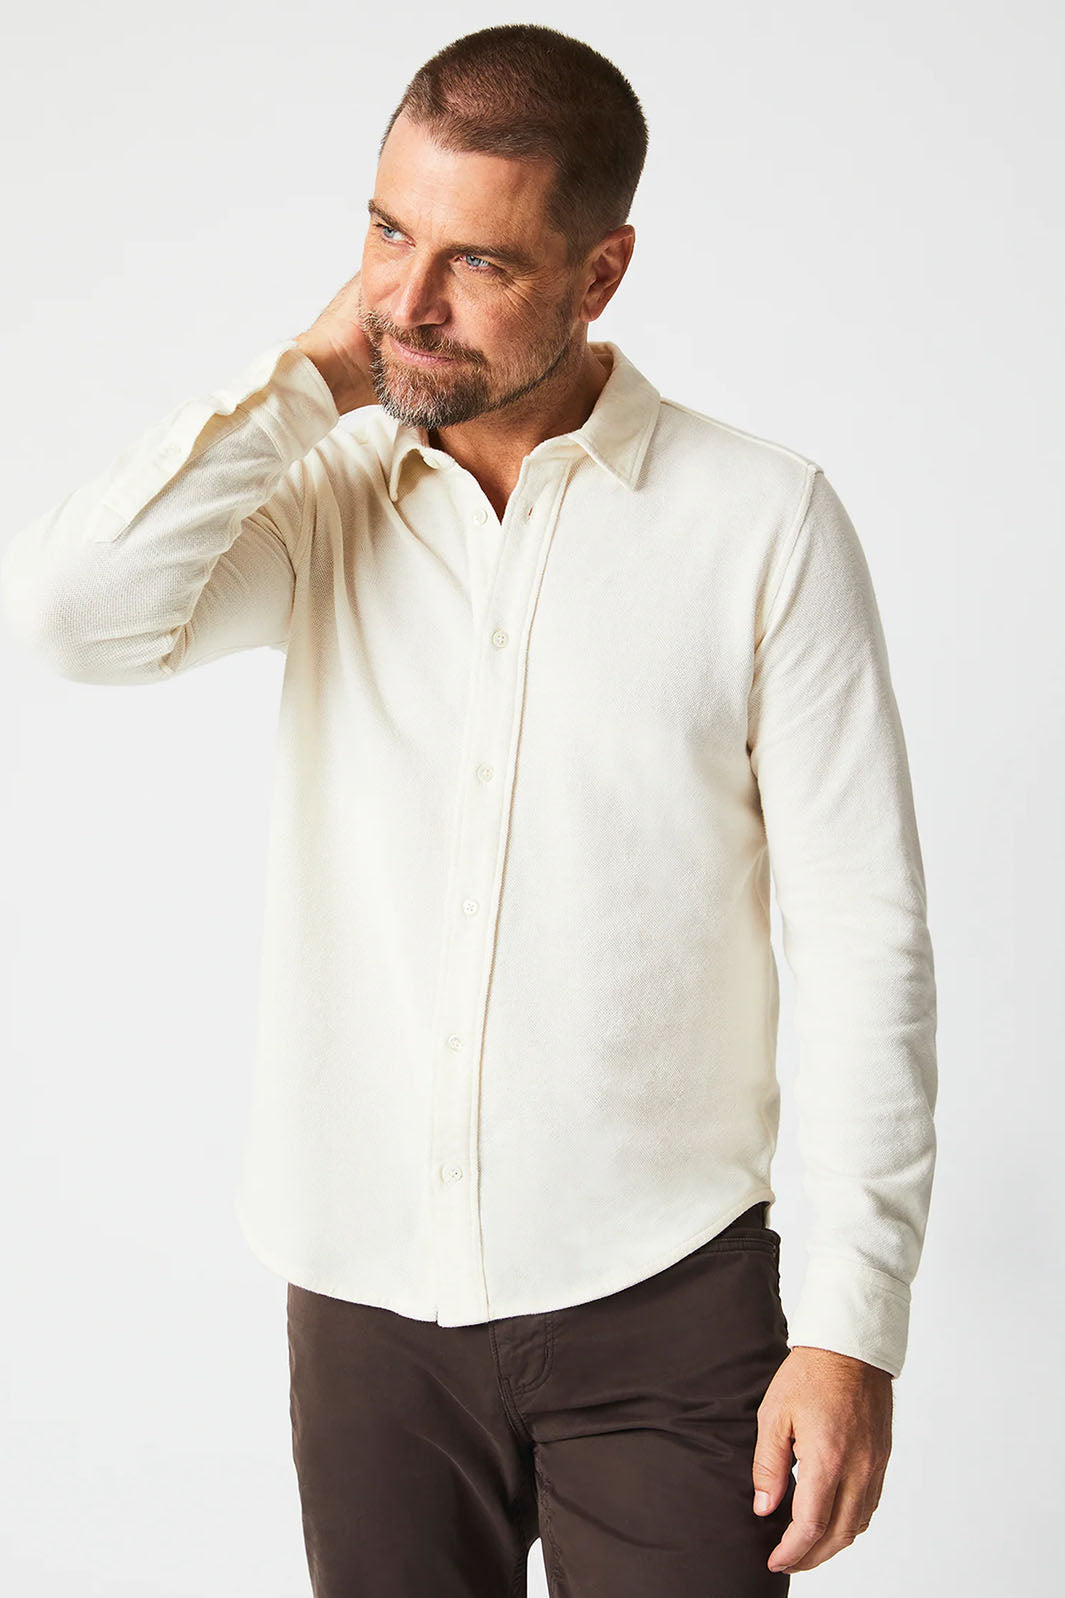 Knit Yellowhammer Button-Up Shirt - Tinted White